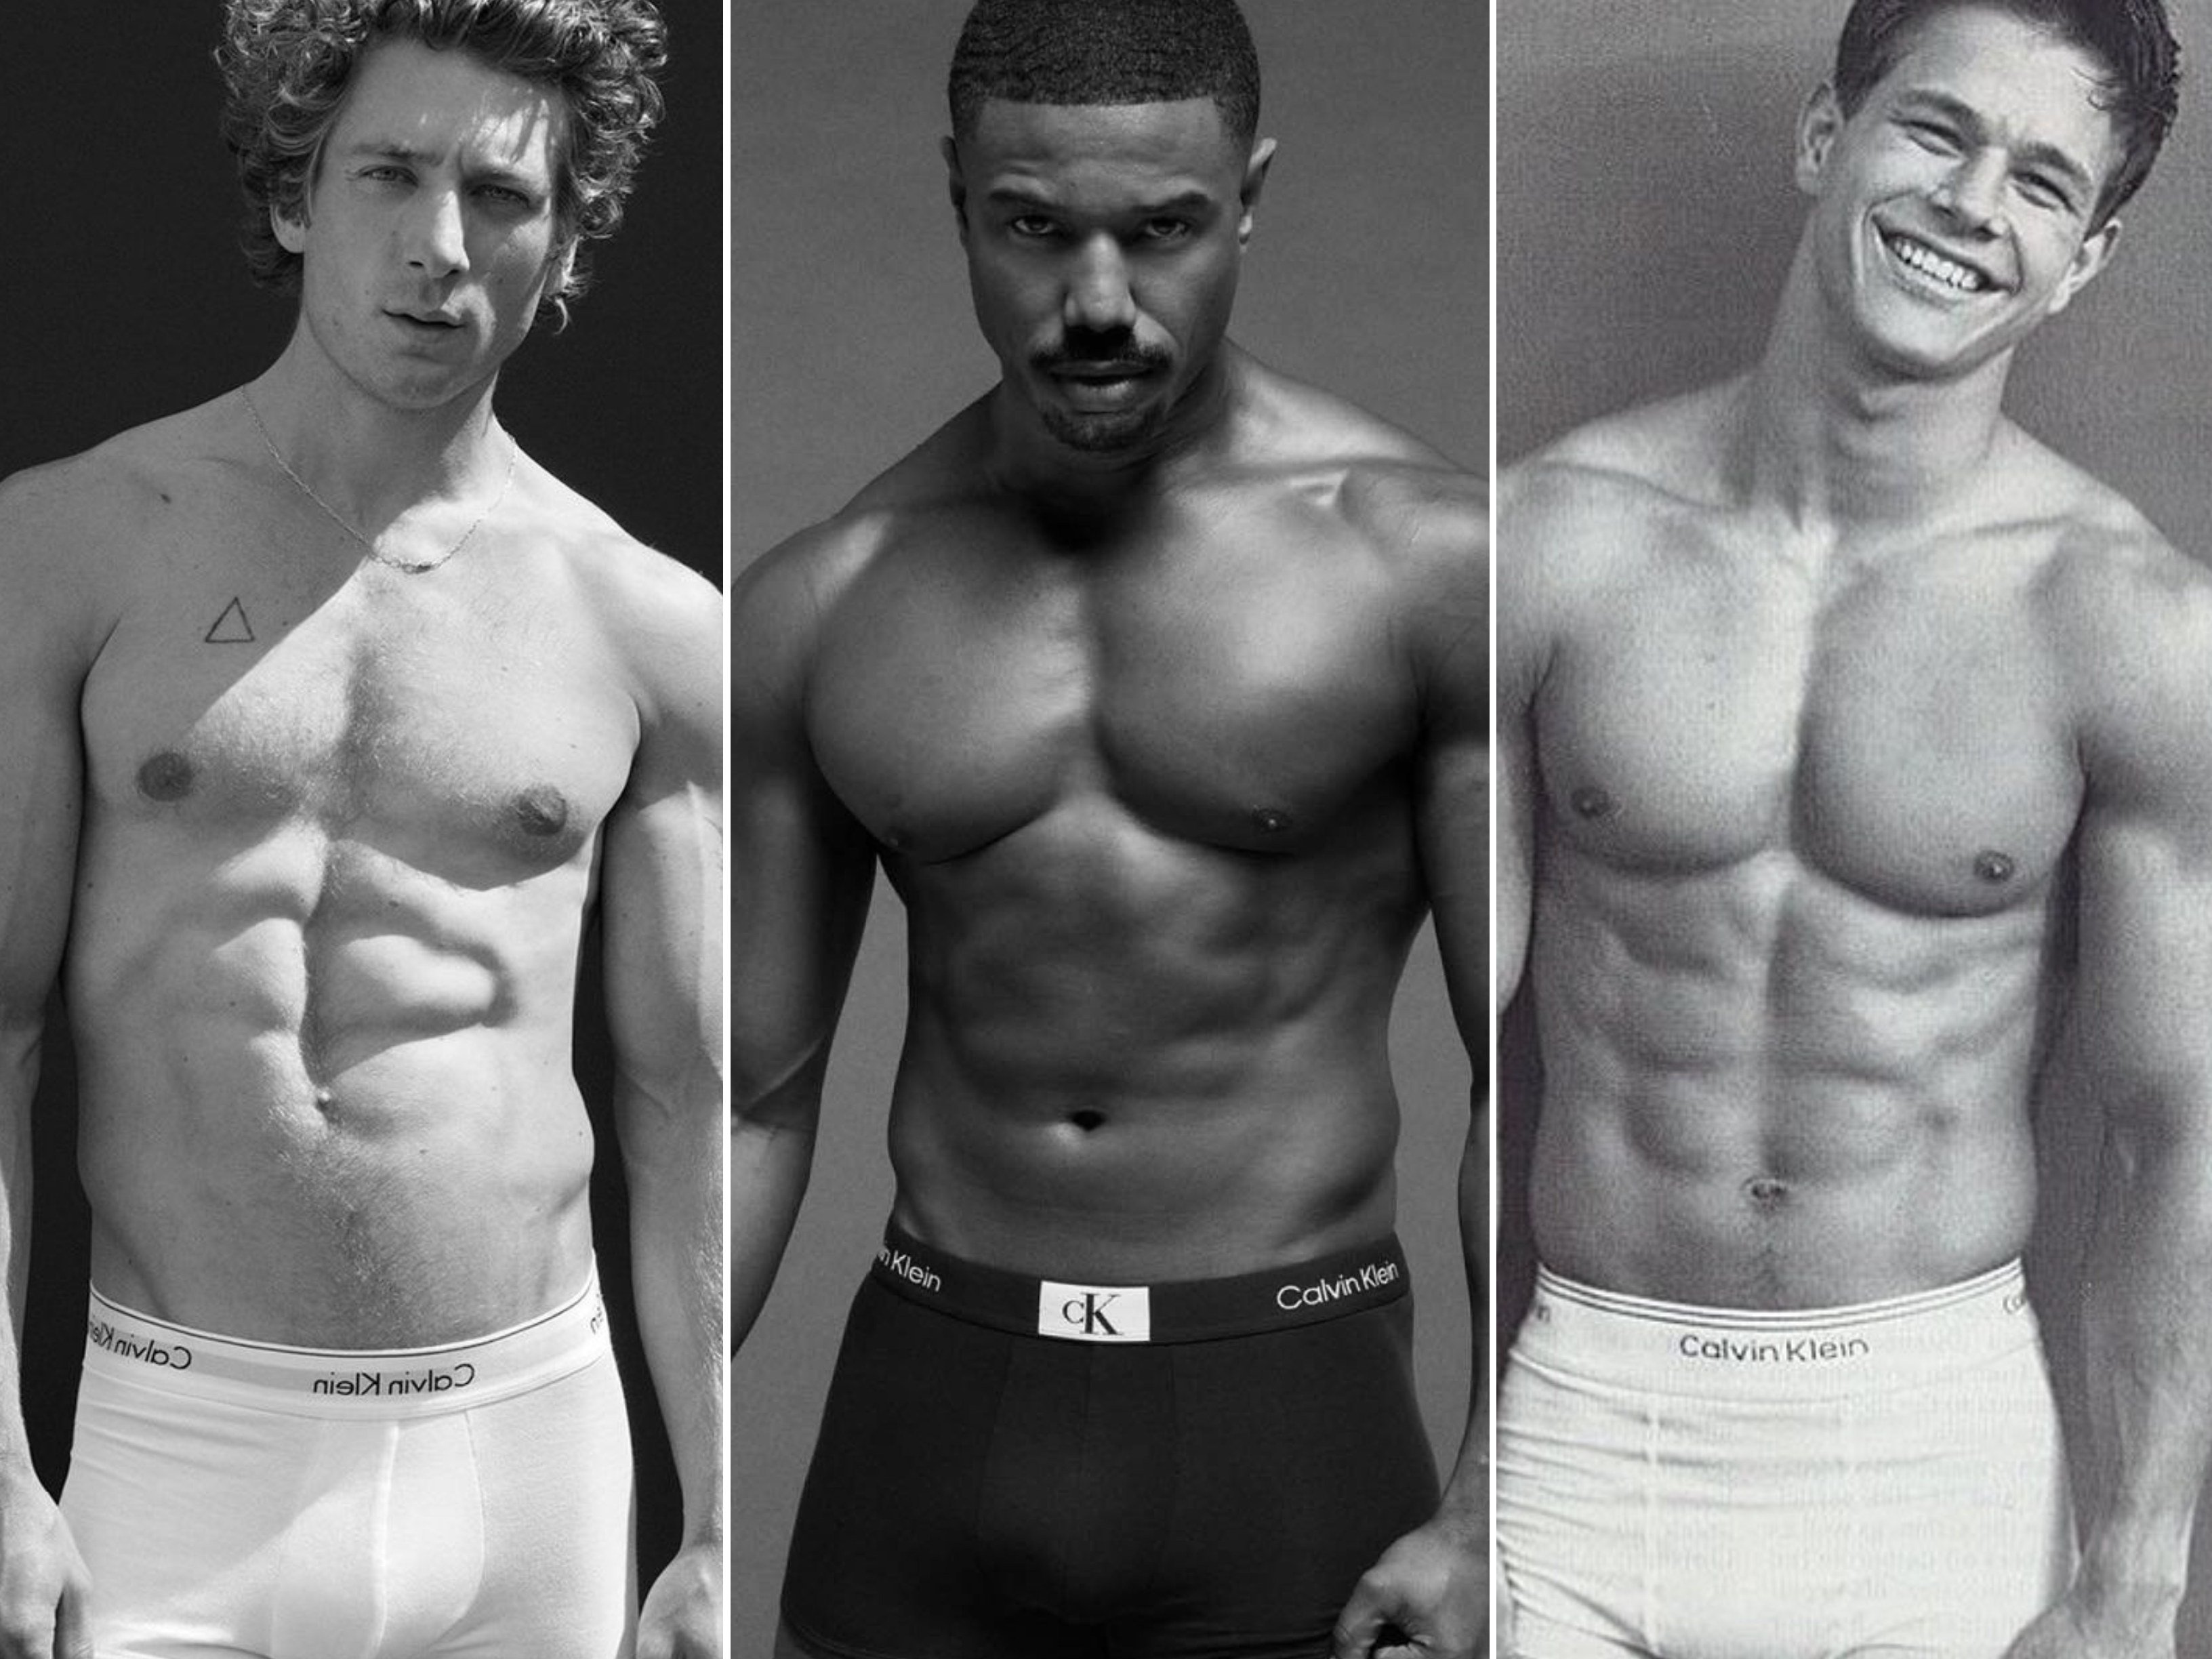 Jeremy Allen White, Michael B. Jordan and Mark Wahlberg are among the famous names to have appeared in iconic Calvin Klein underwear campaigns over the years. Photos: @vintagevirgin, @calvinklein/Instagram